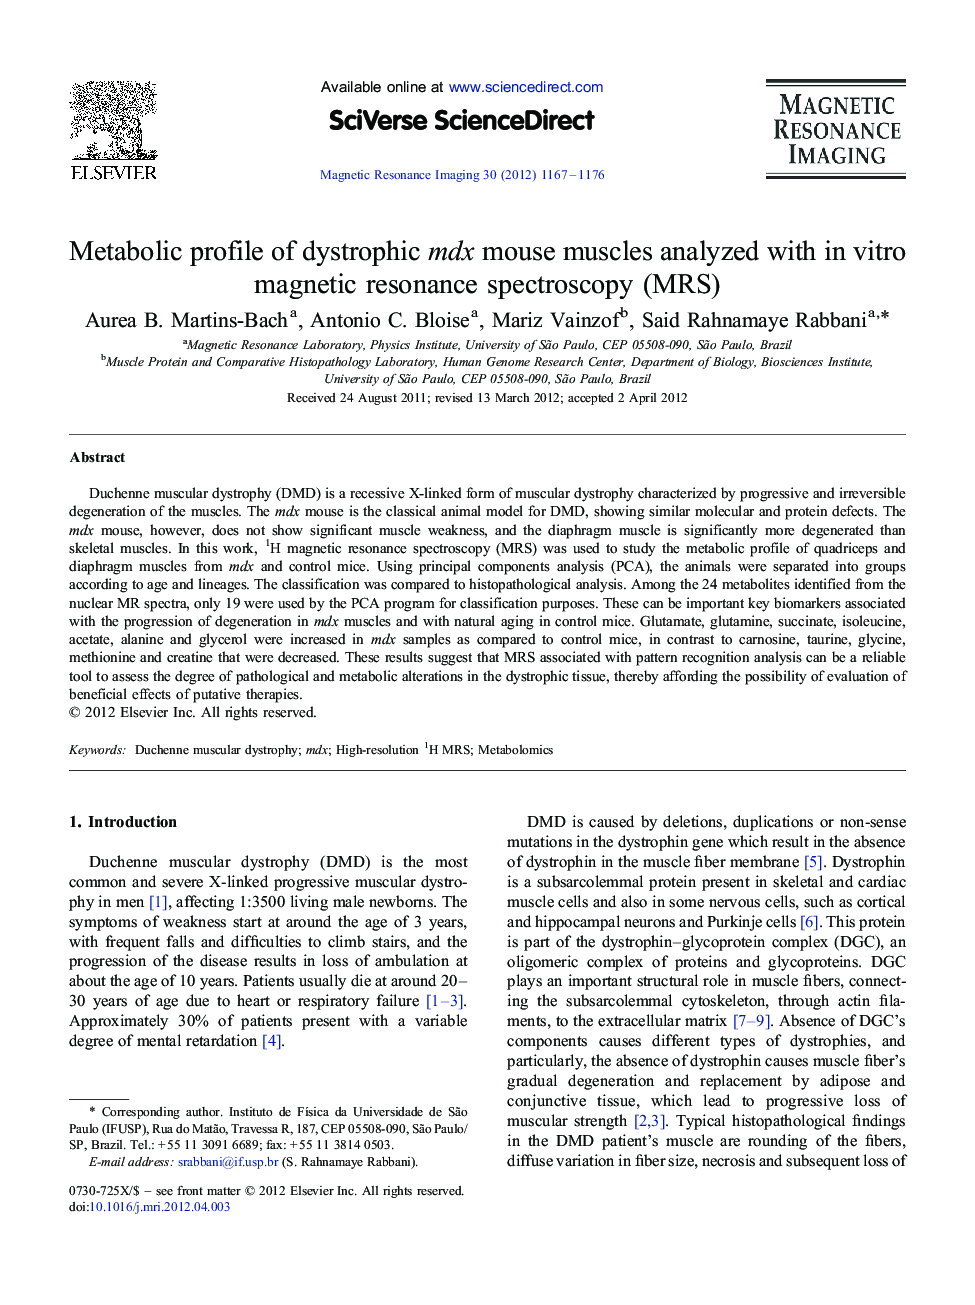 Metabolic profile of dystrophic mdx mouse muscles analyzed with in vitro magnetic resonance spectroscopy (MRS)